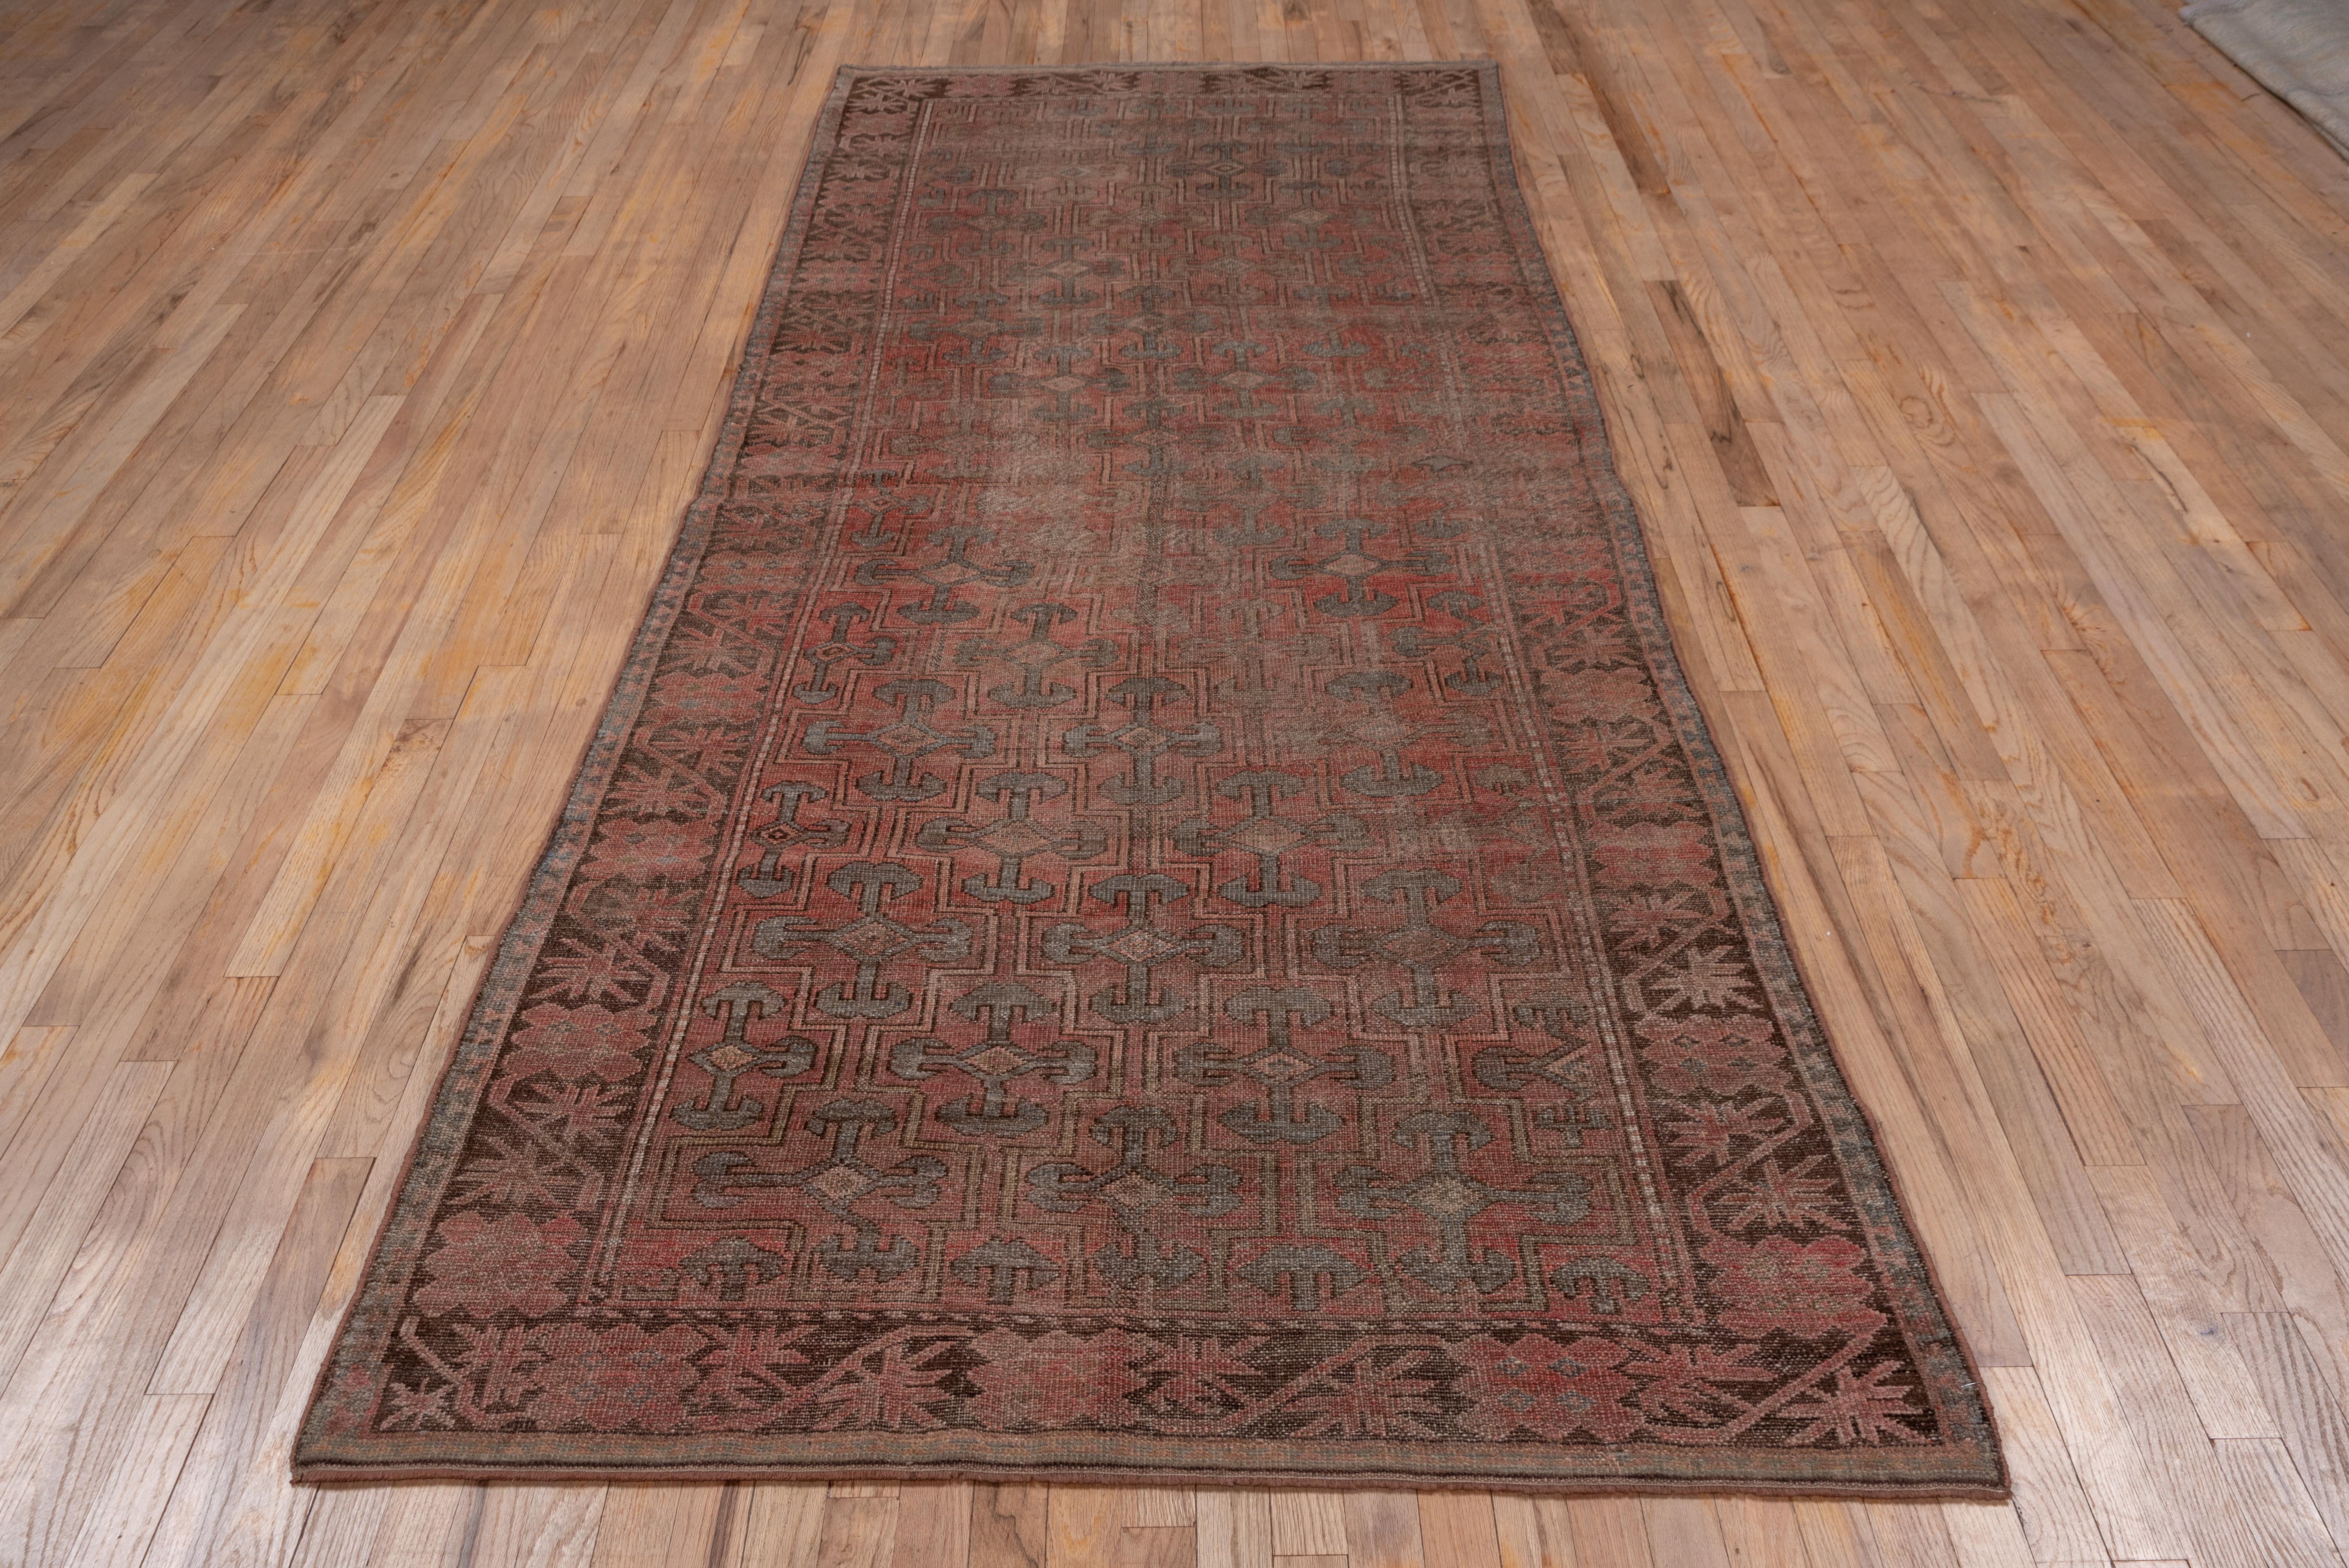 1910s Antique Khotan Gallery Rug, Periwinkle & Pink Palette In Good Condition For Sale In New York, NY